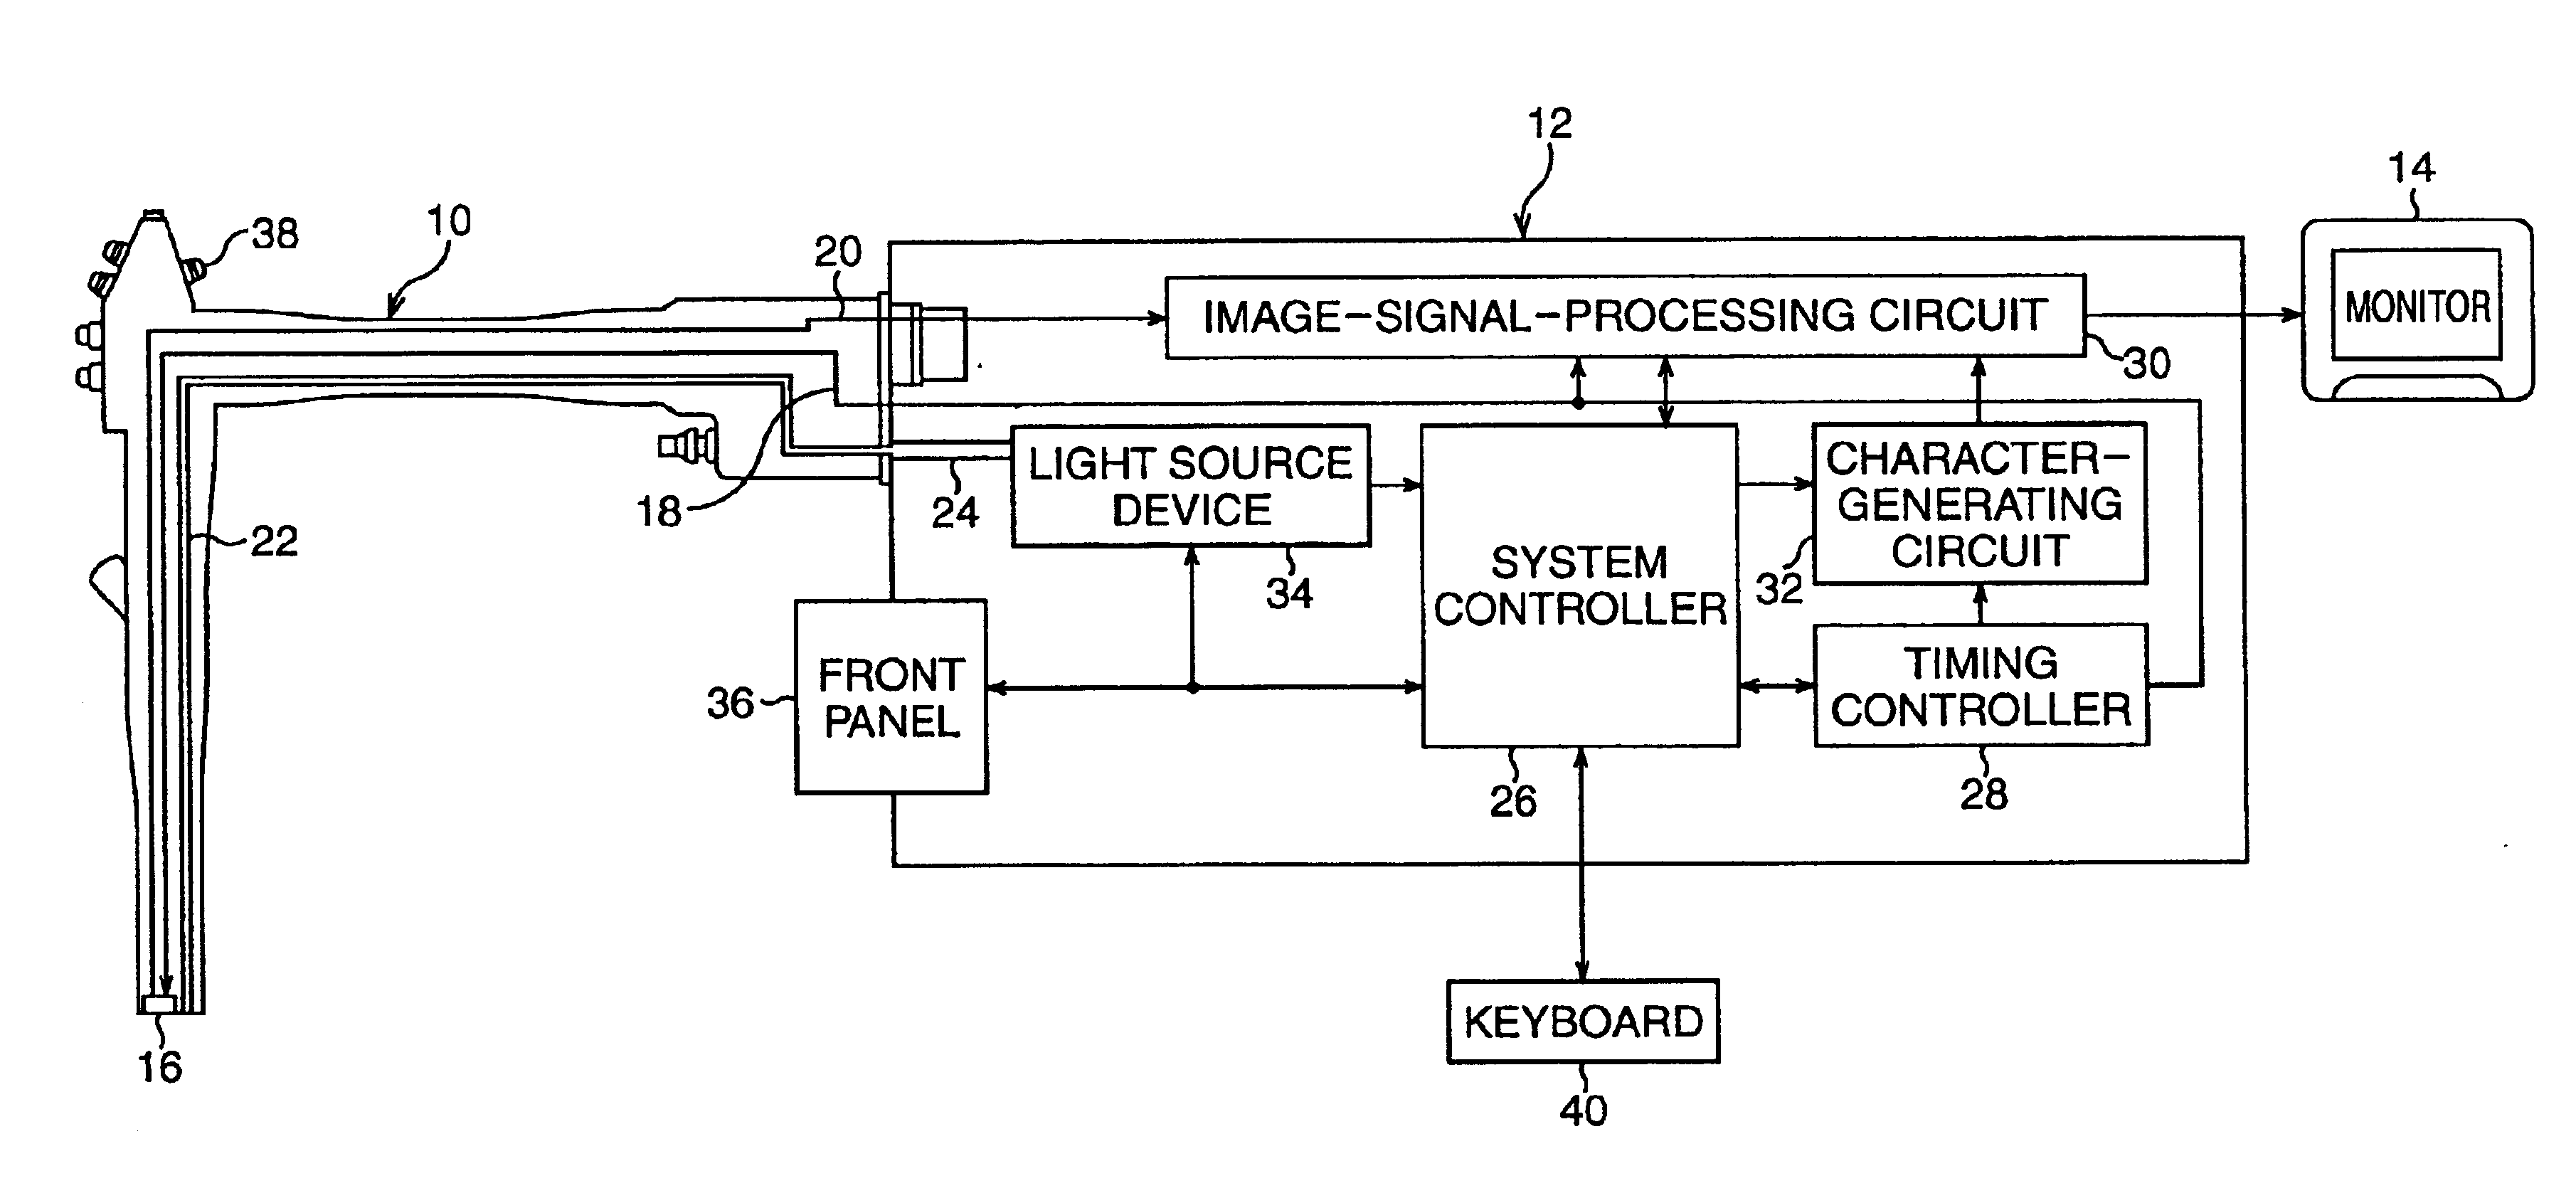 Organ-region-indication system incorporated in electronic endoscope system